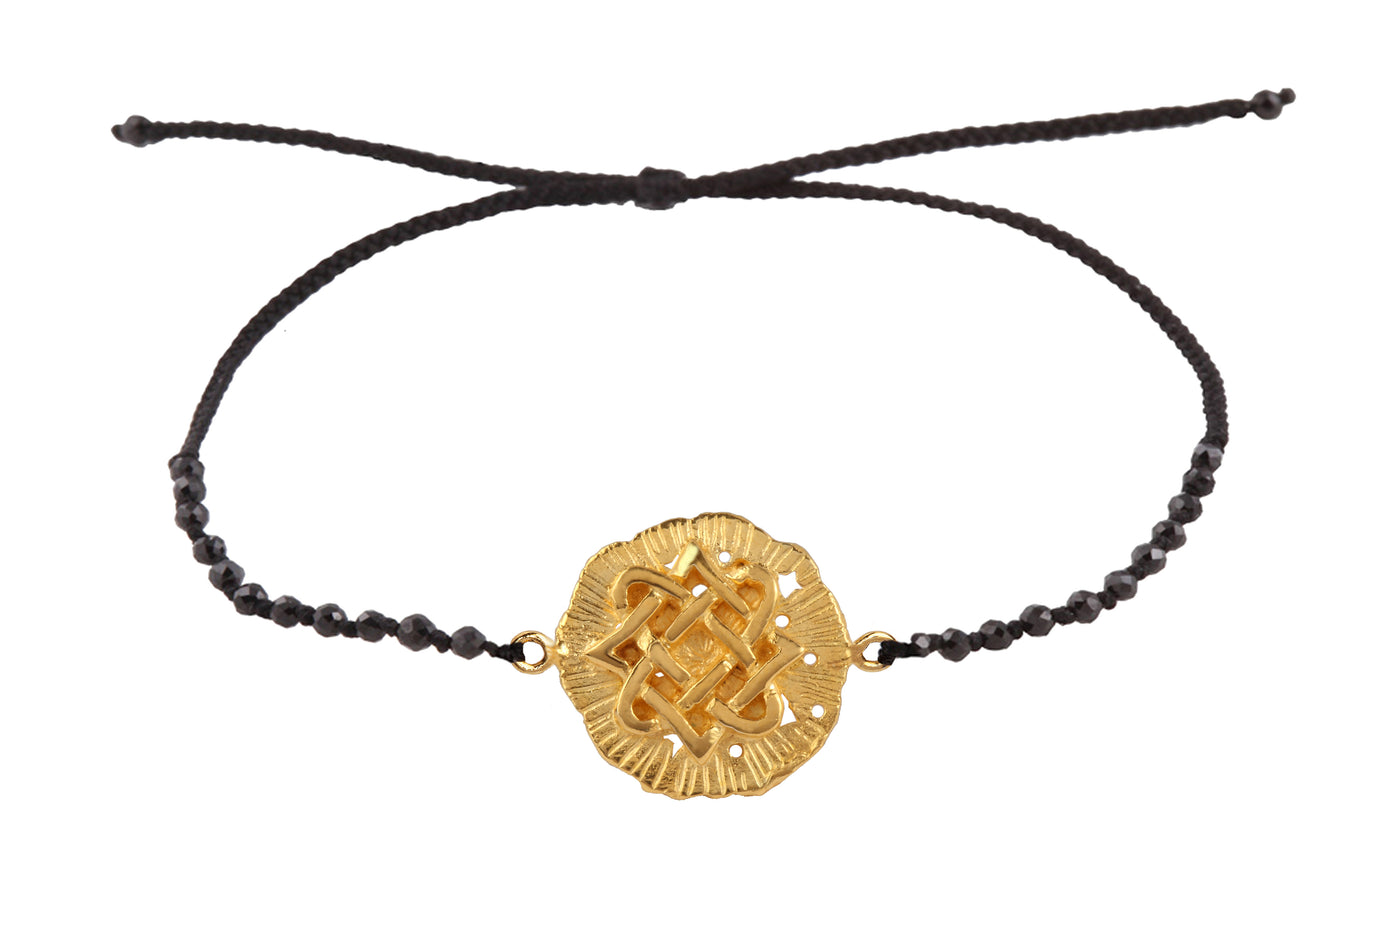 Lada medallion amulet bracelet with beads. Gold plated